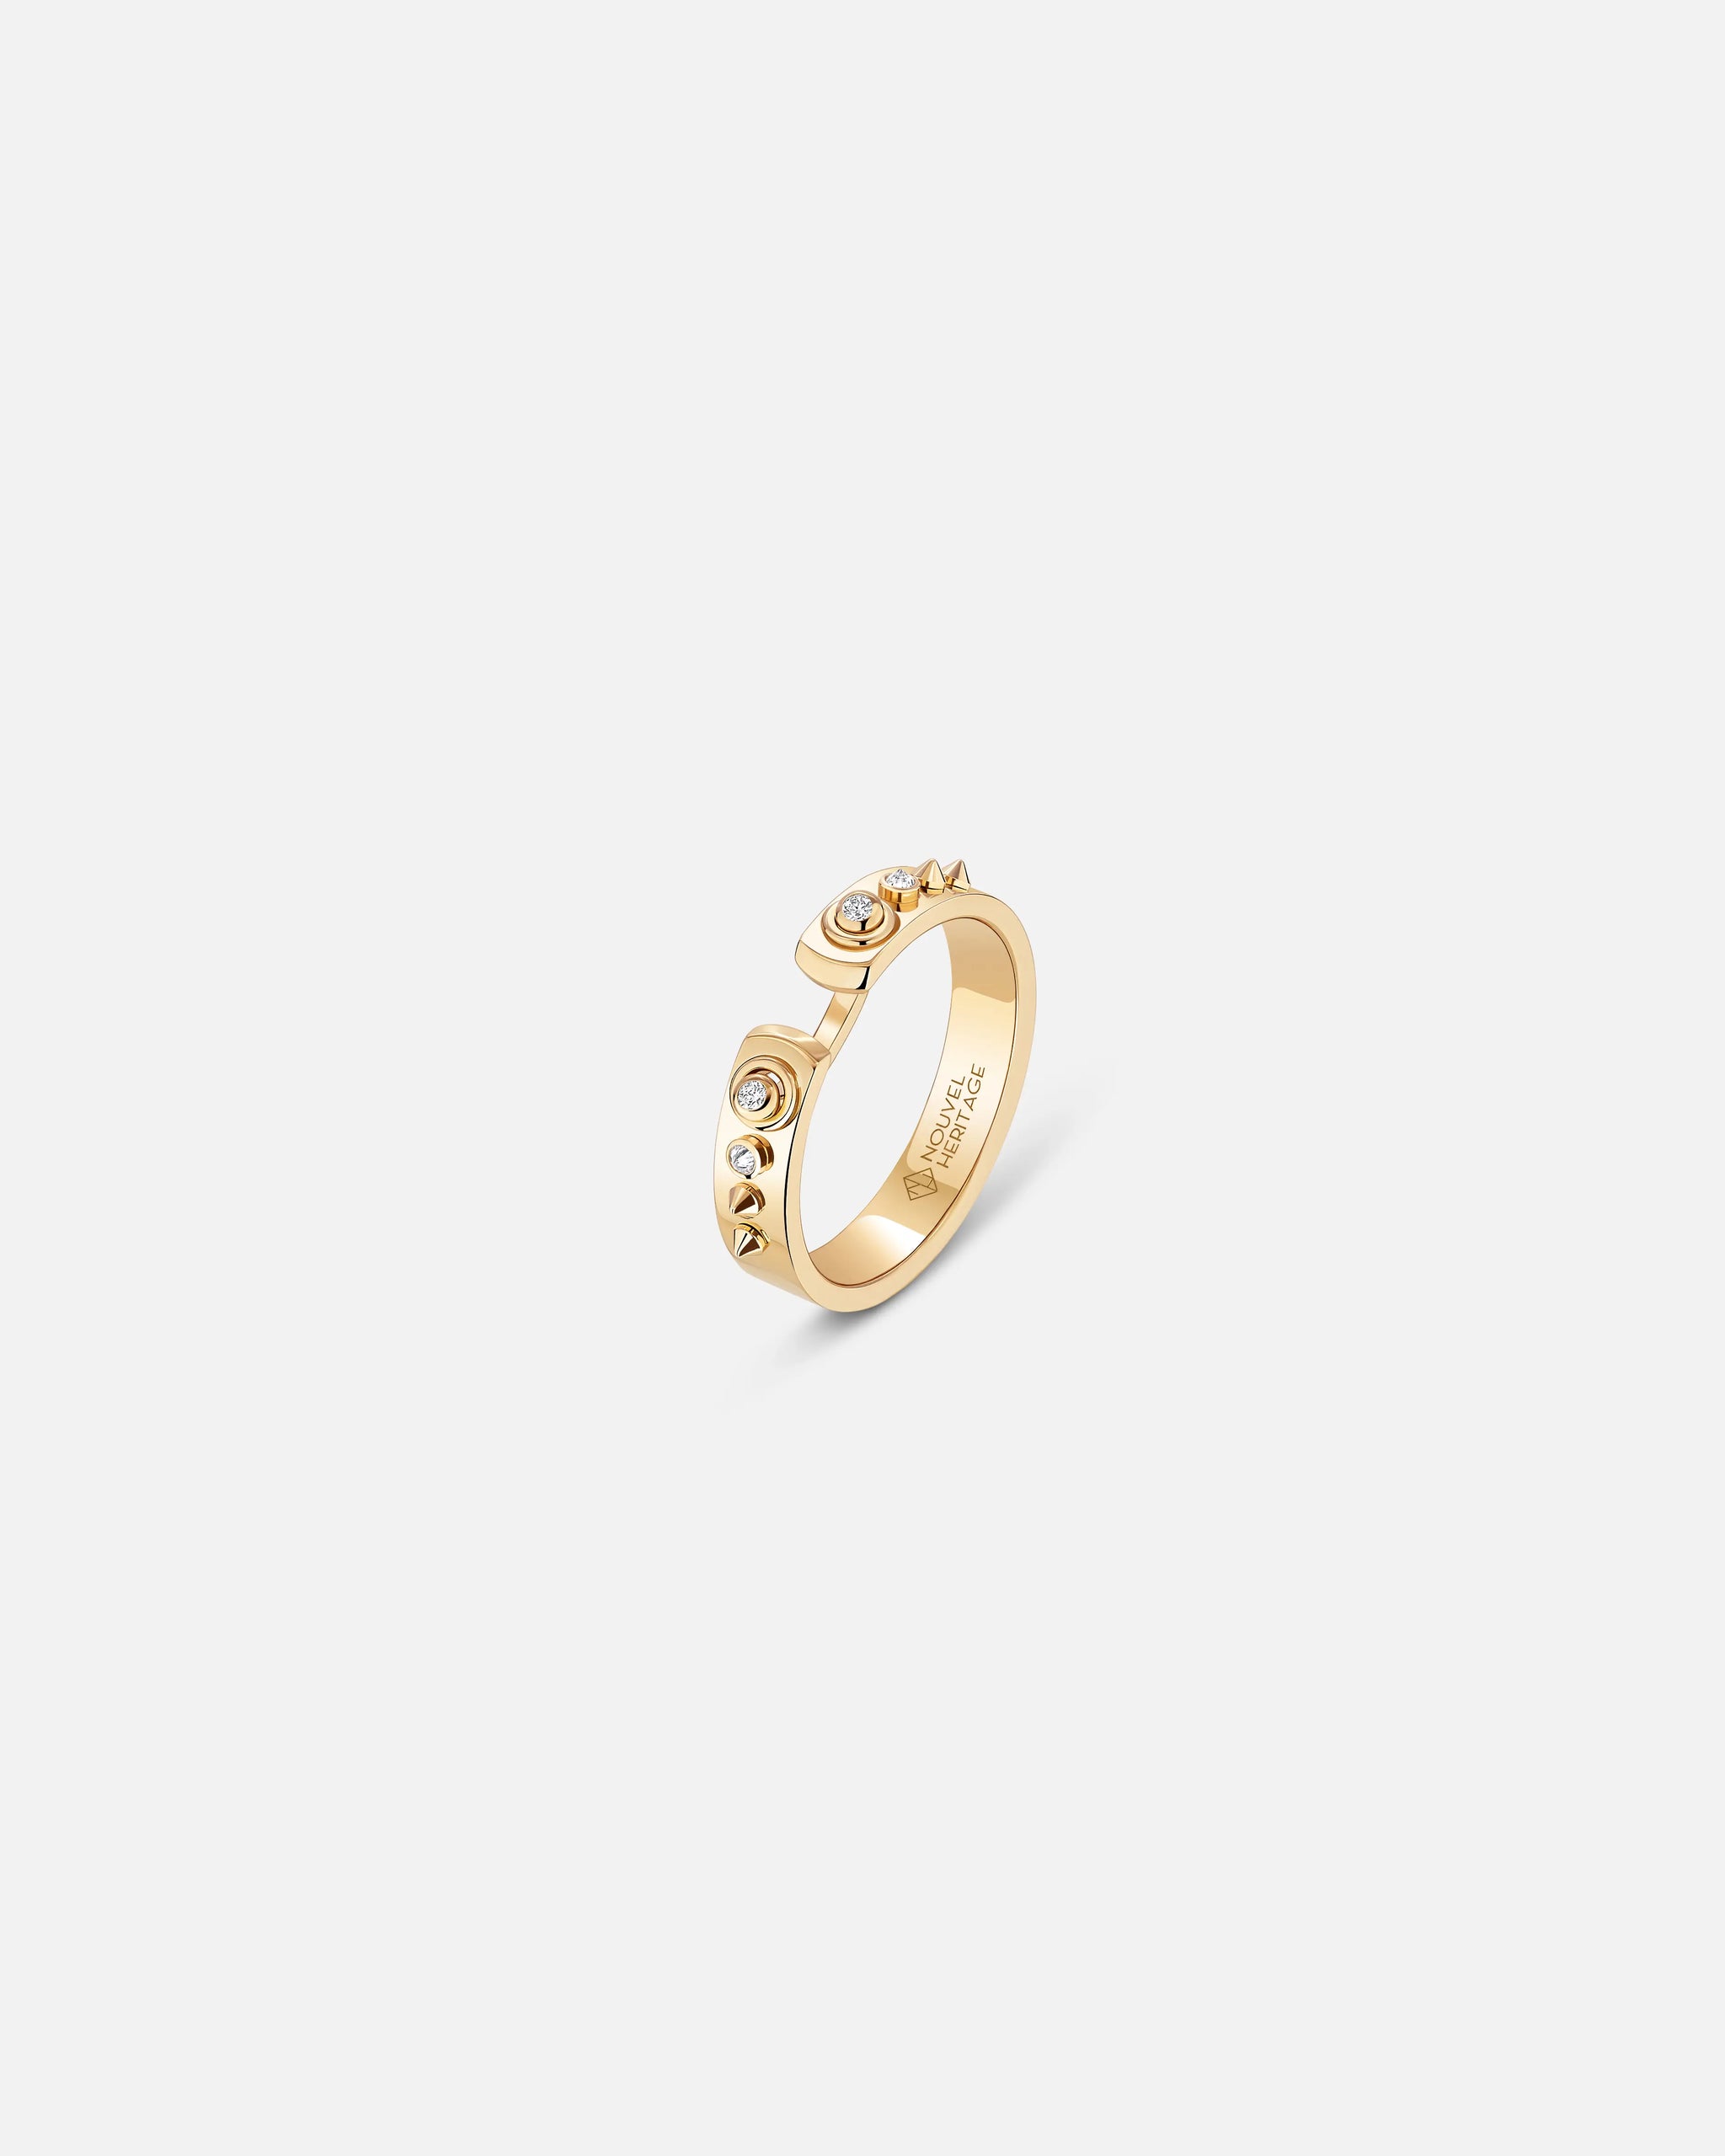 Brunch in NY Mood Ring in Yellow Gold - 1 - Nouvel Heritage